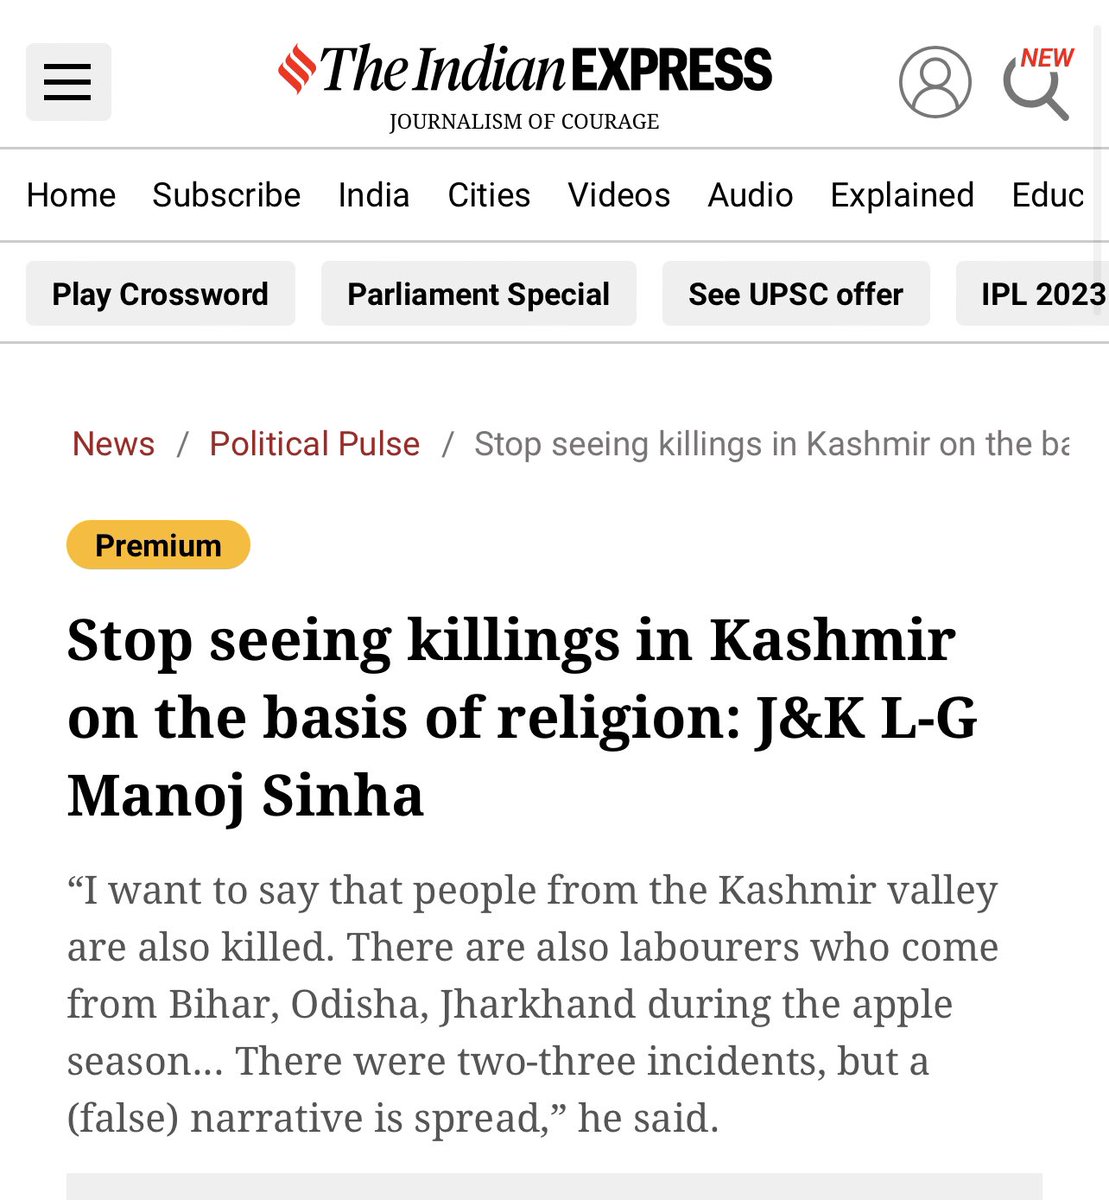 Another Hindu Killing in Kashmir

Deepu of Udhampur (Jammu) killed by Jihadists in Anantnag (Kashmir) on 29.05.2023 (Because he was a Hindu earning livelihood in an Islamic Domain). 

Since 1947, State of India has always remained an “Active Player” in facilitating Hindu…